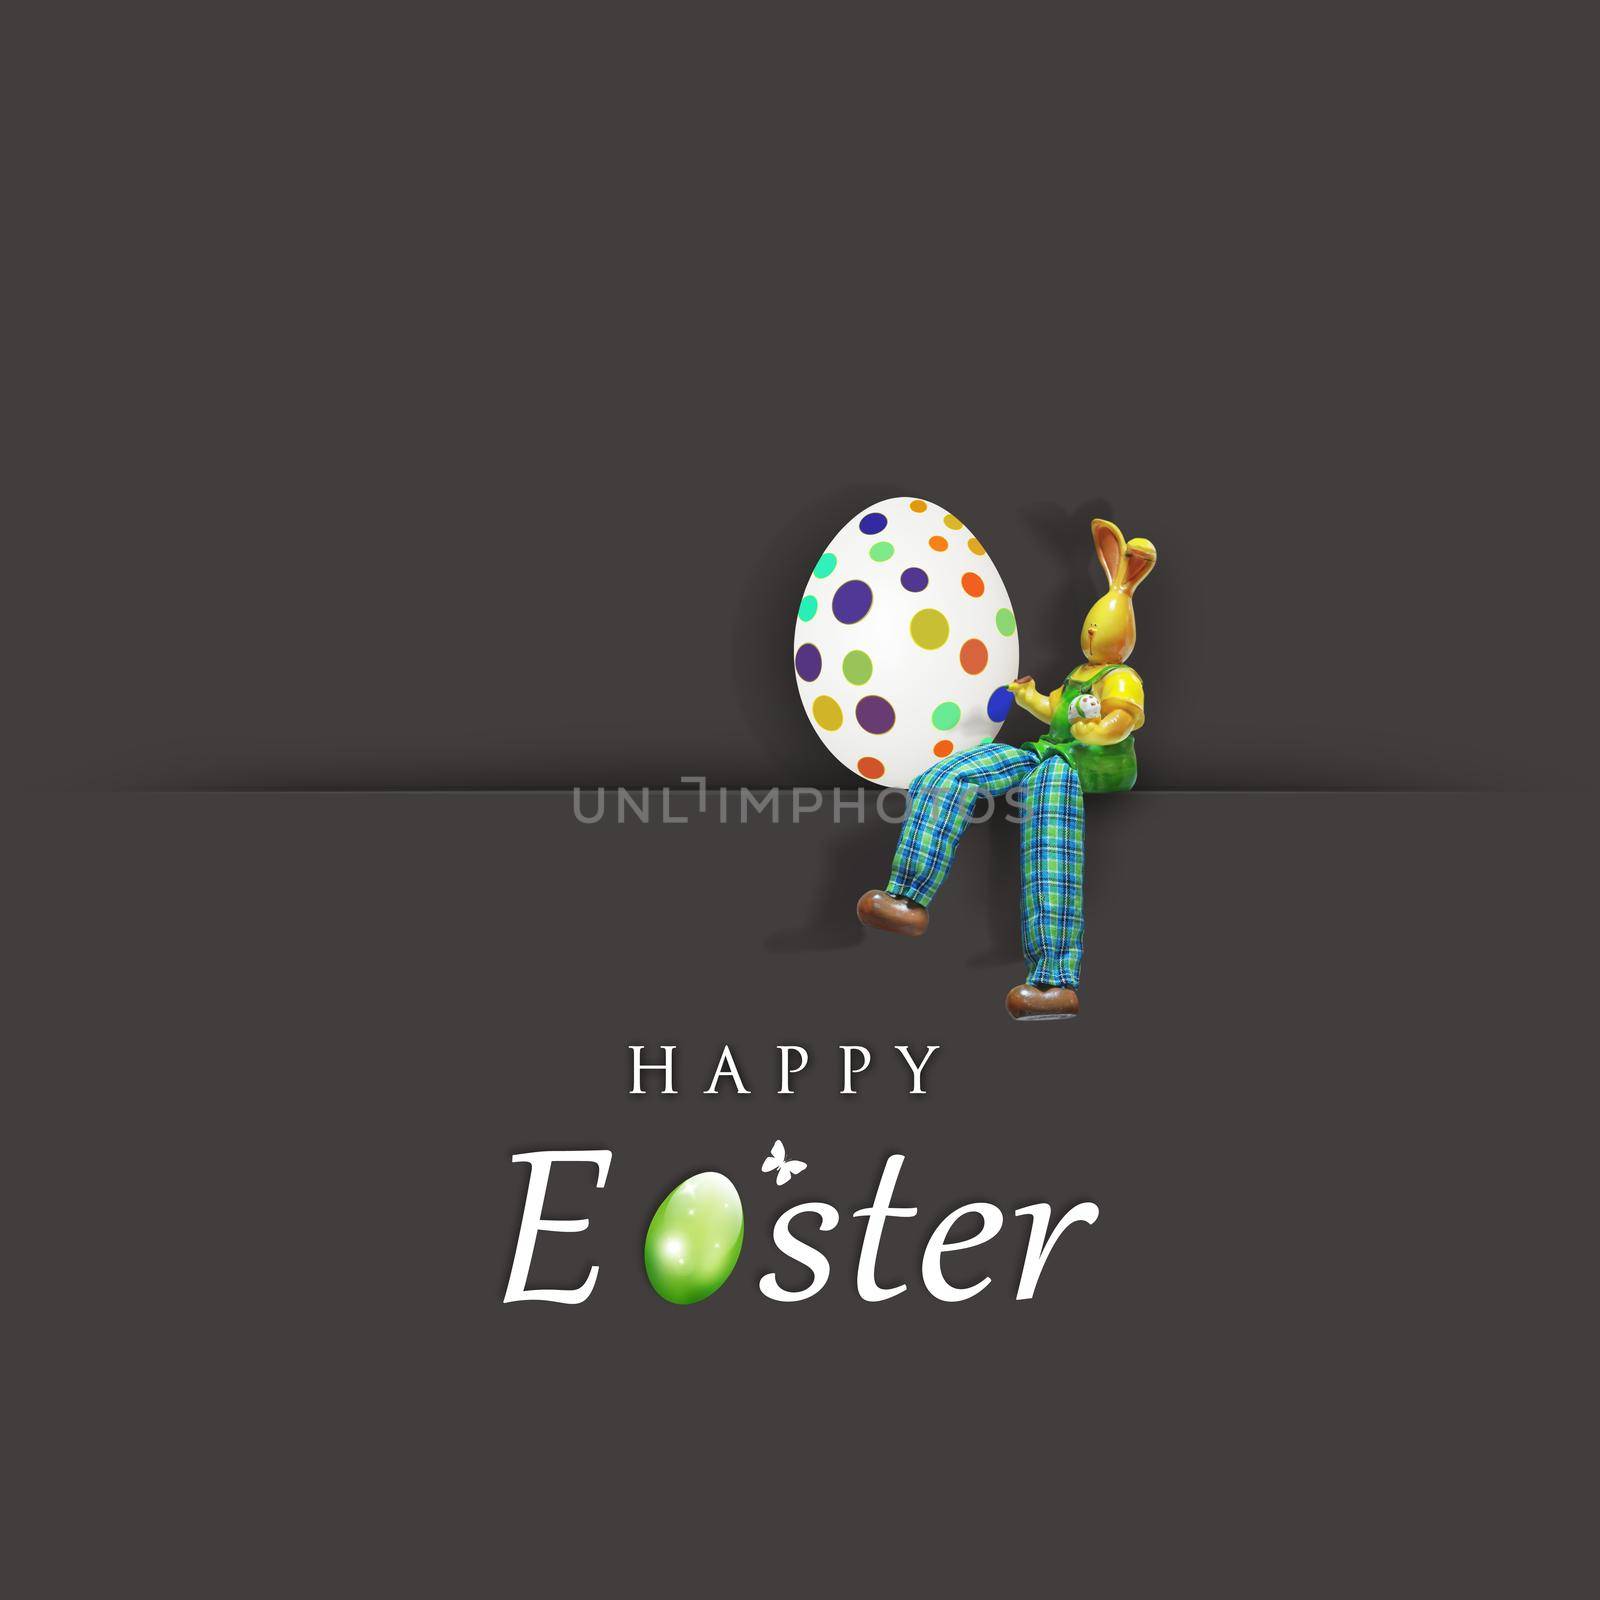 Beautiful Easter background with Easter rabbit. 3d illustration by Taut